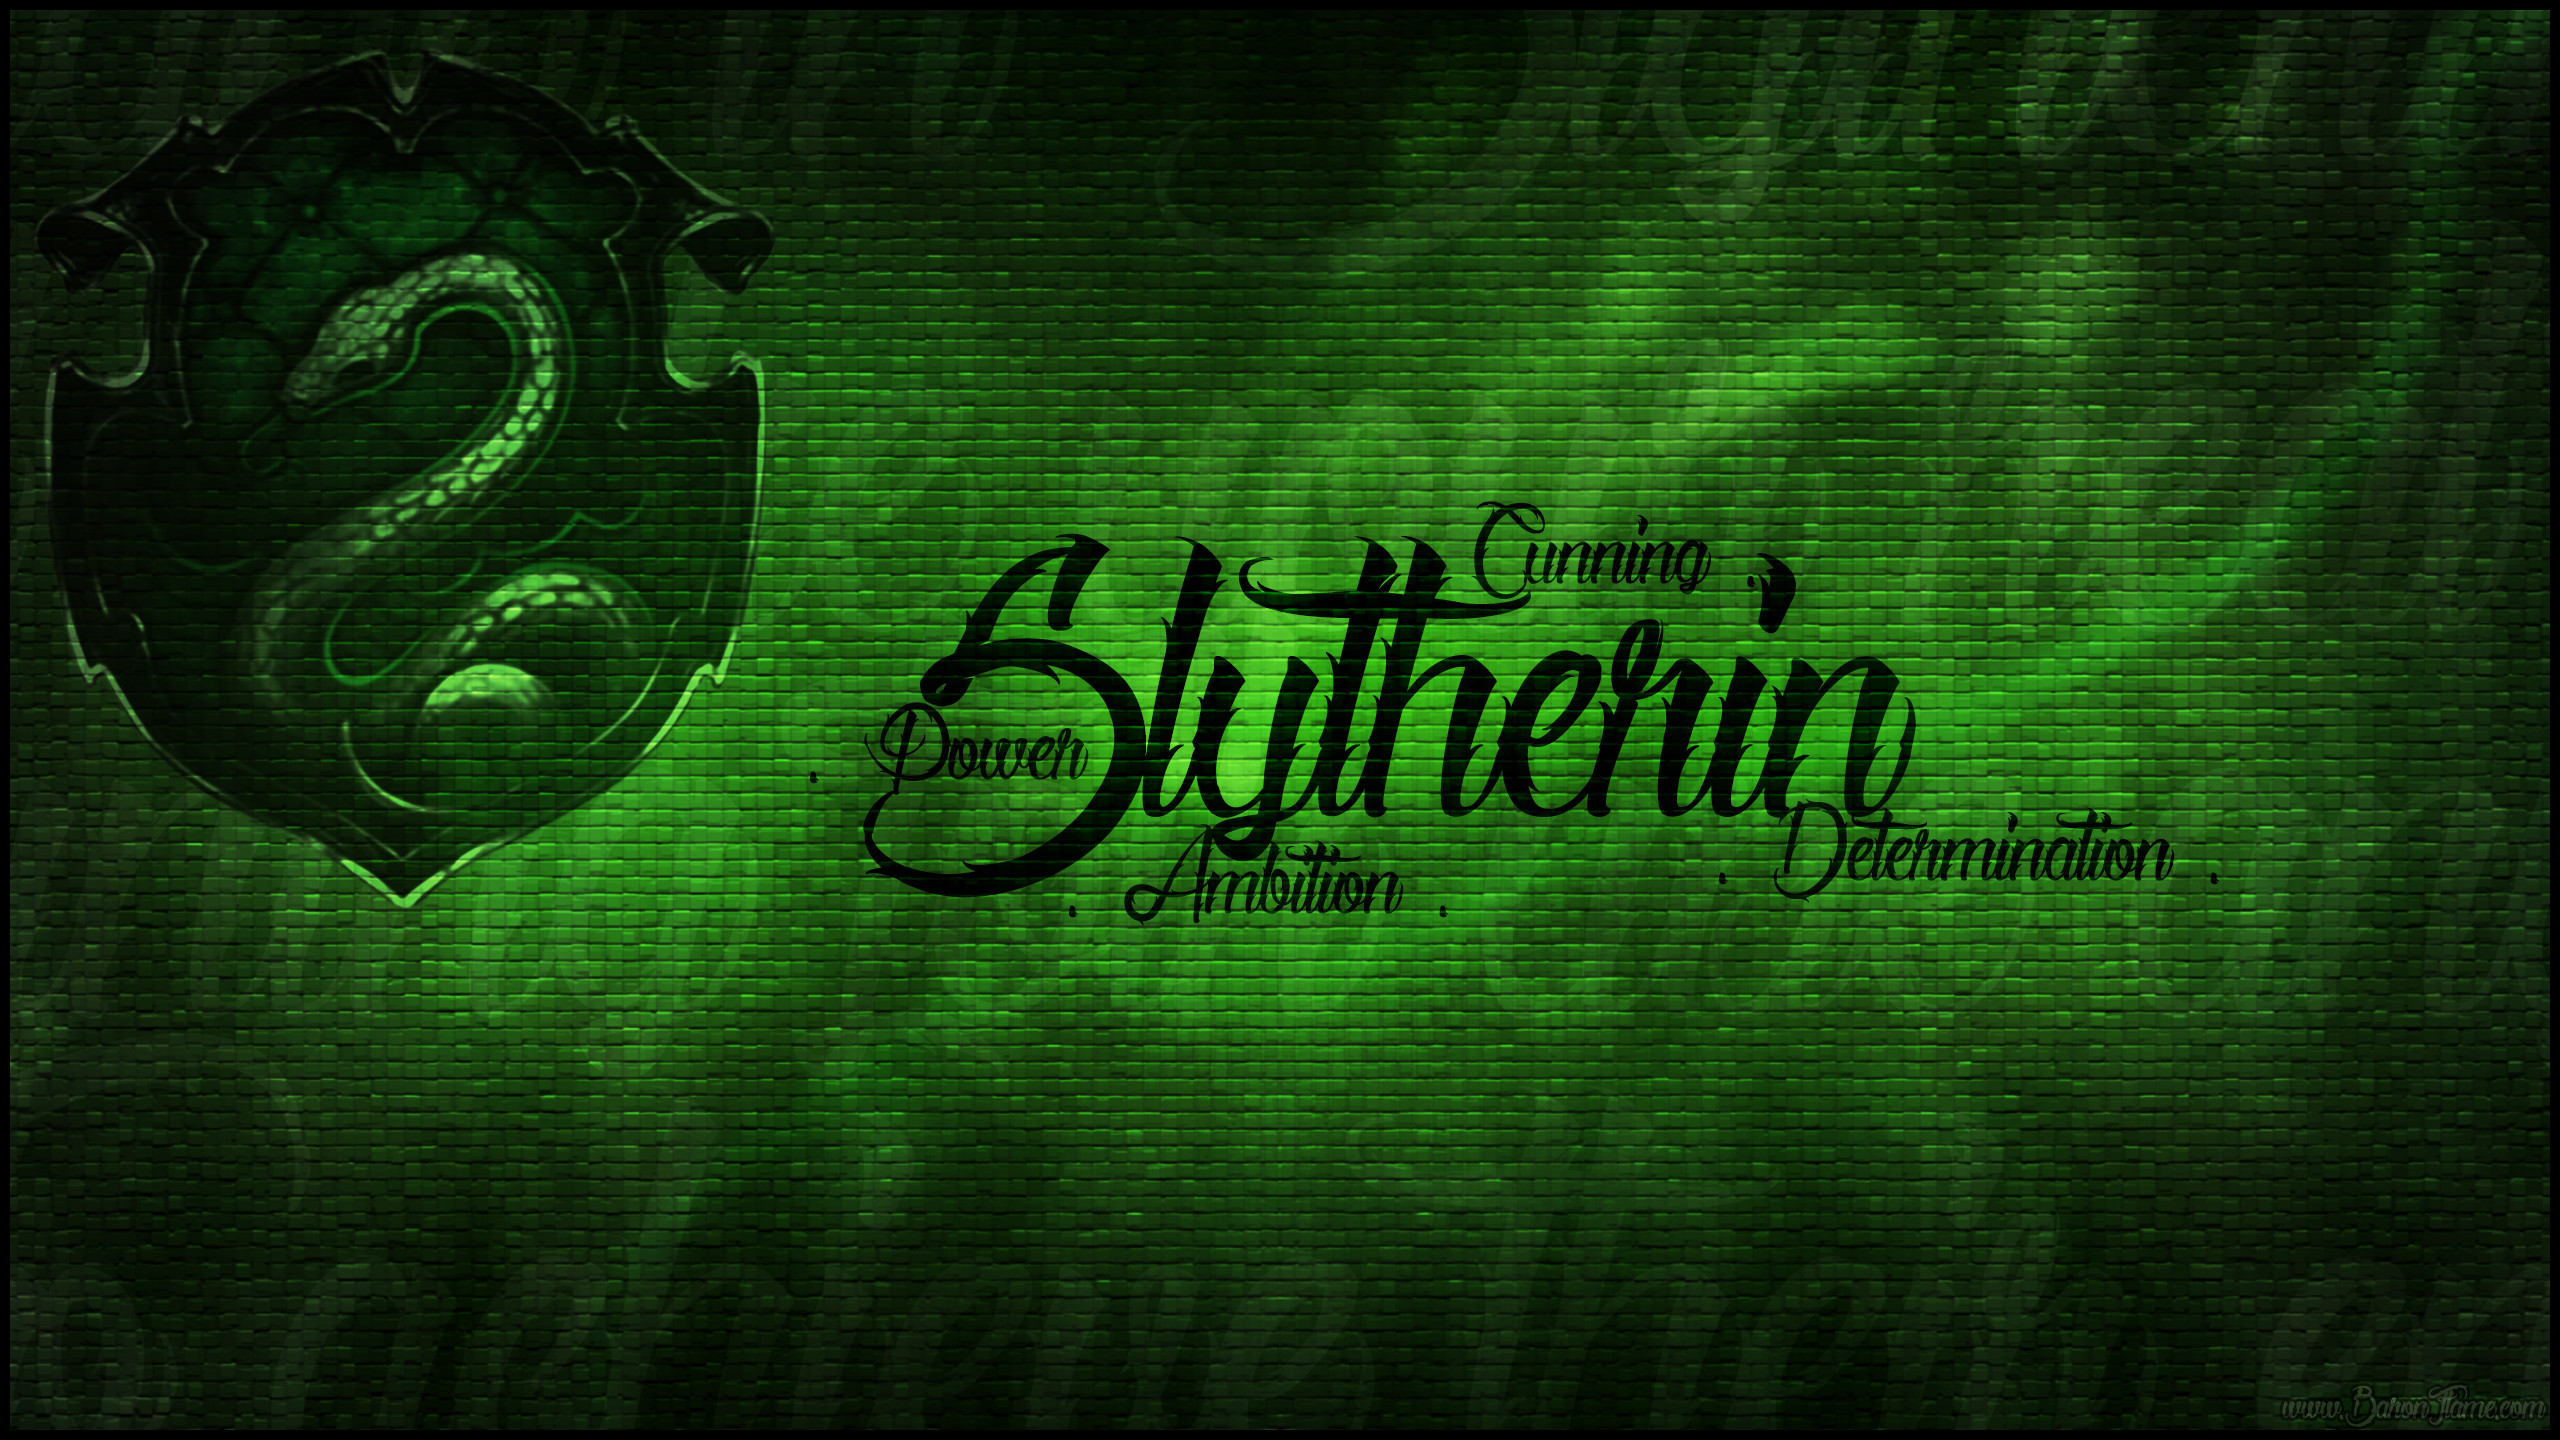 2560x1440 Slytherin Pride Wallpaper by Baronflame Slytherin Pride Wallpaper by  Baronflame